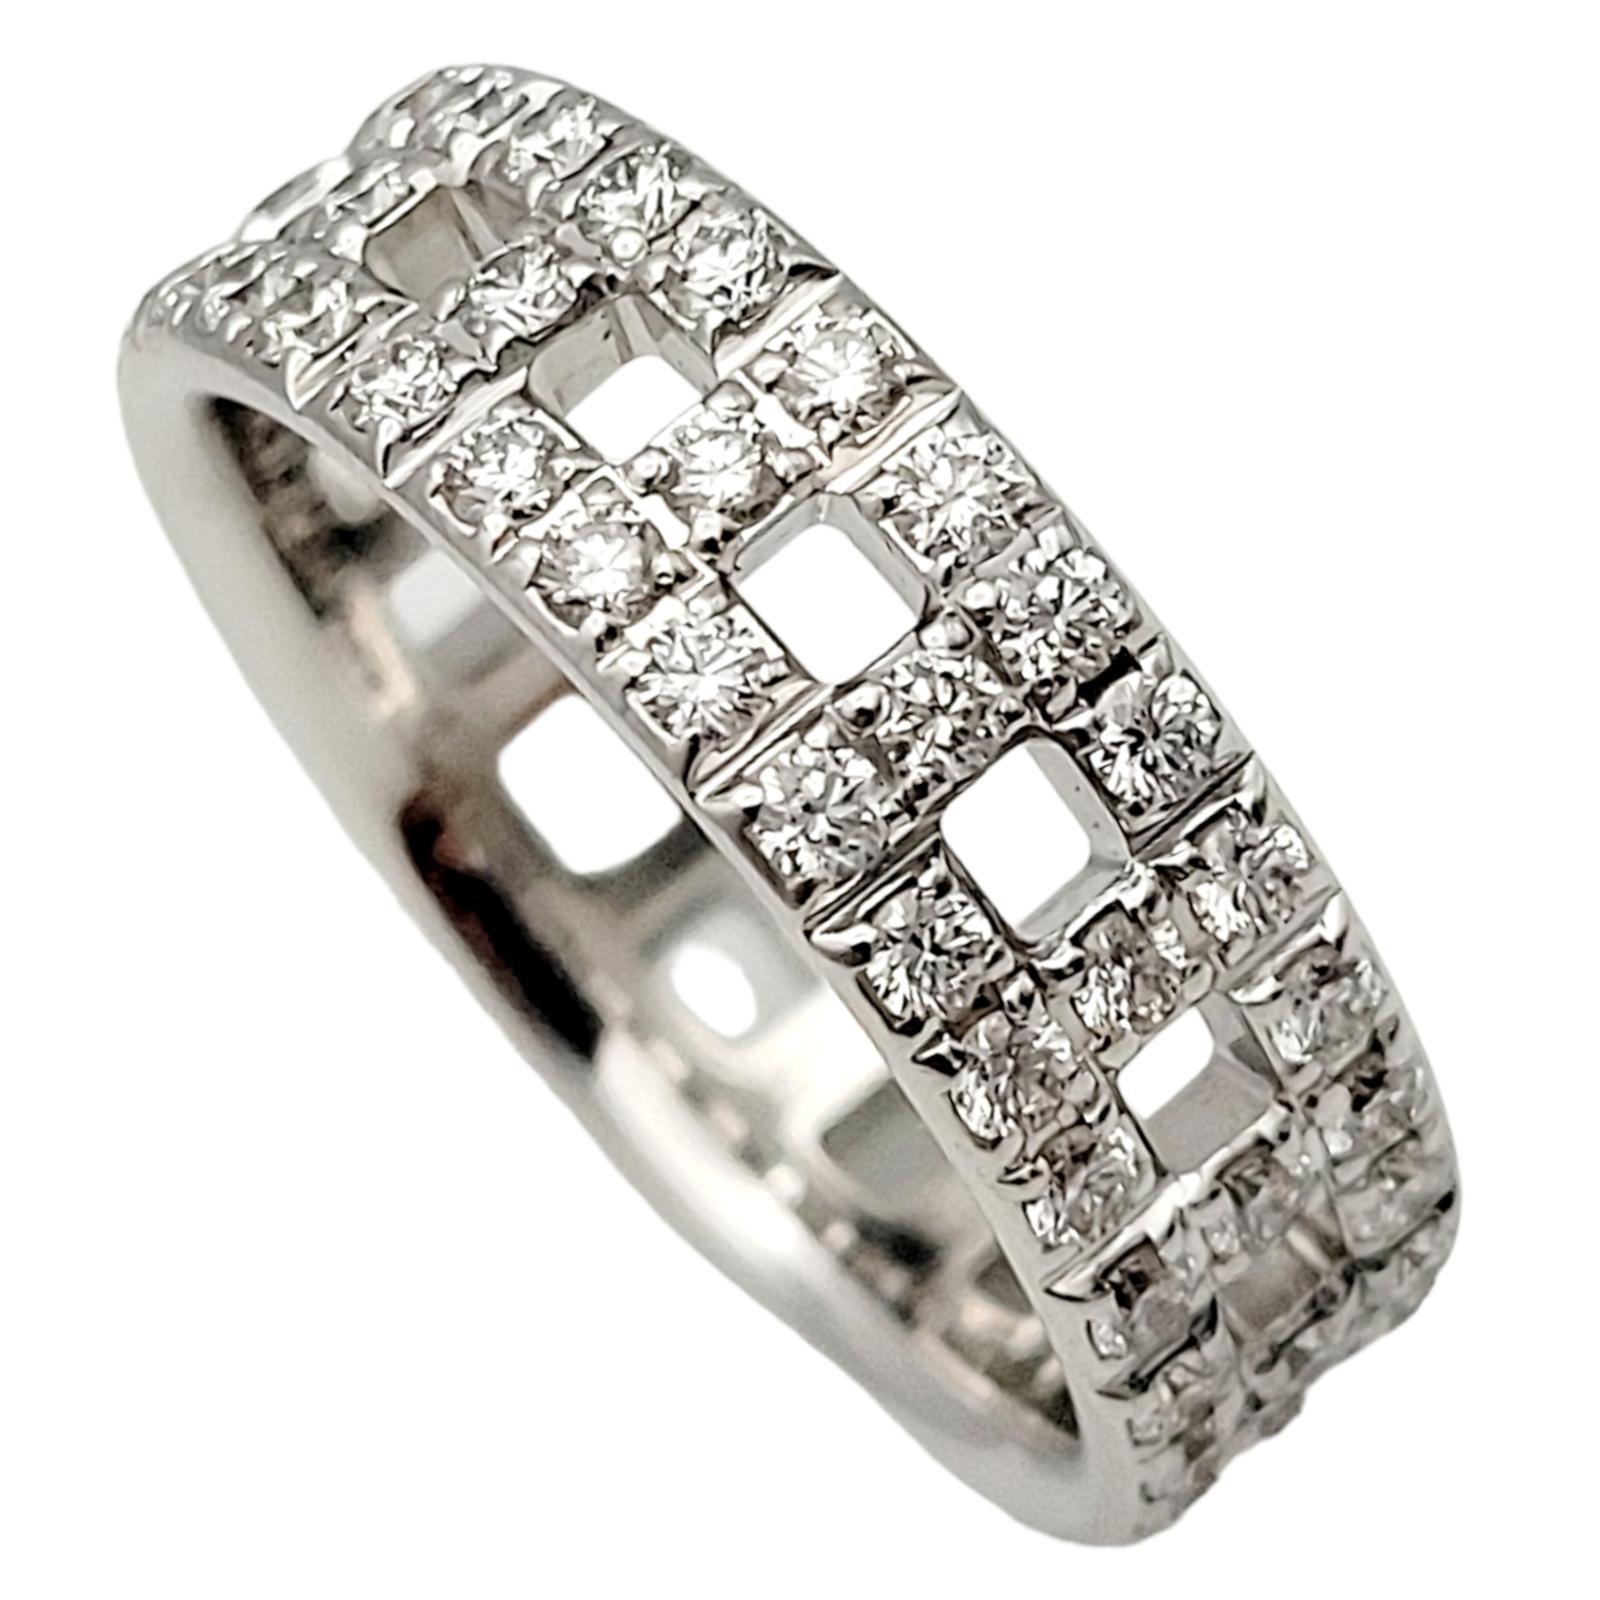 Tiffany & Co. Tiffany T True Wide Band Ring with Diamonds in 18 Karat White Gold 1